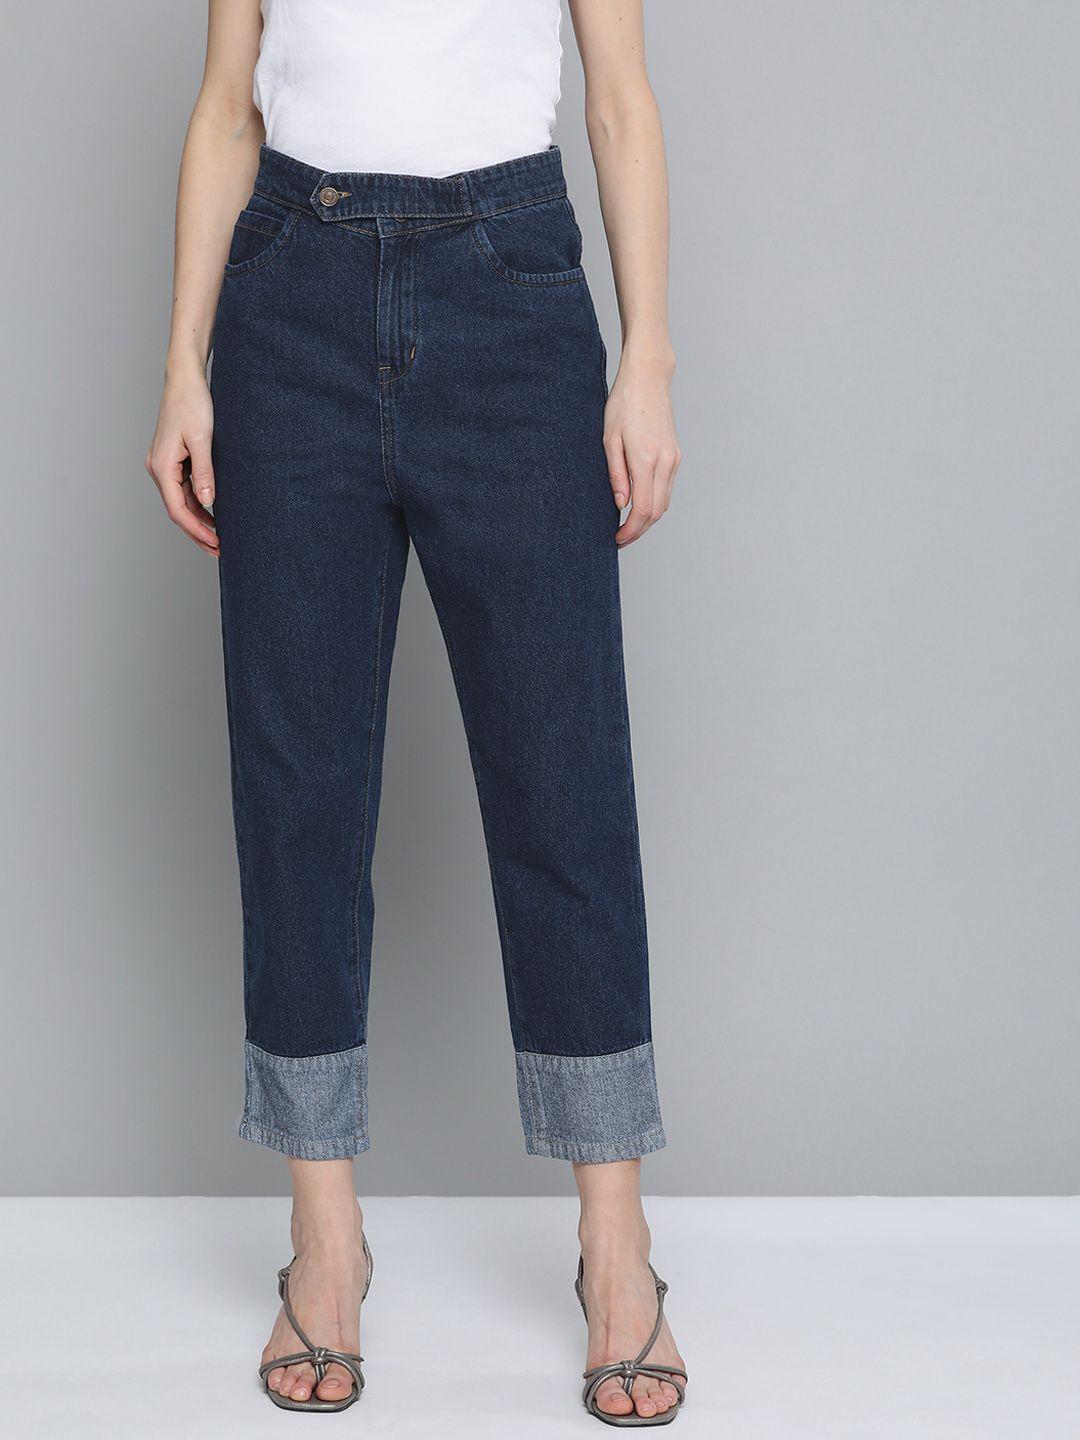 sassafras-women-navy-blue-pure-cotton-relaxed-fit-high-rise-clean-look-jeans